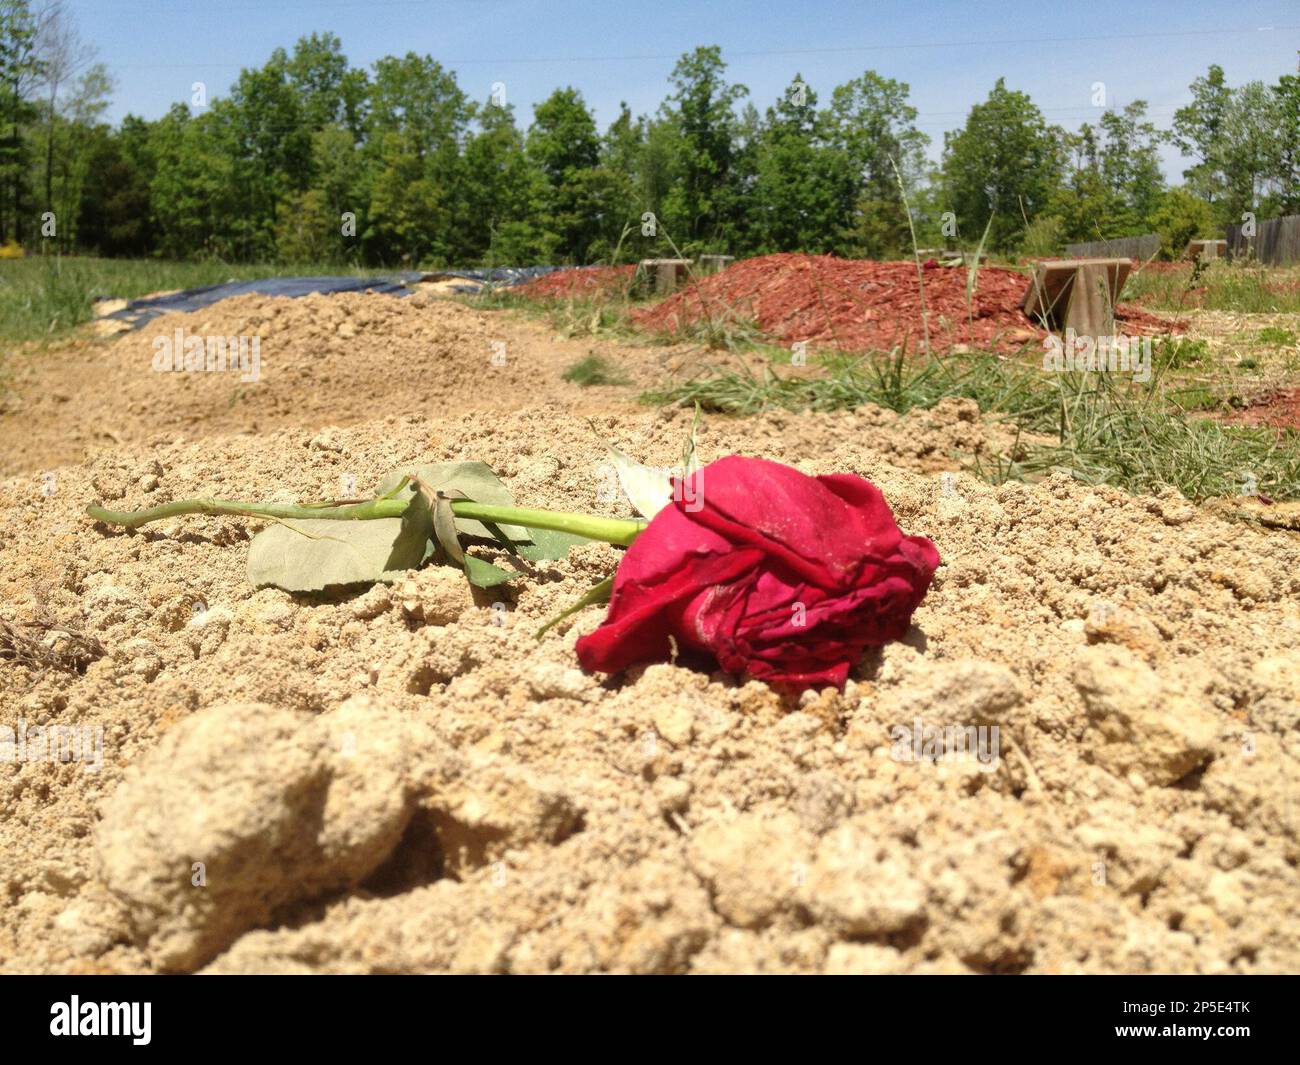 Afskedige Spaceship hyppigt ADDS THAT TSARNAEV'S GRAVE IS ONE OF TWO NEWLY DUG GRAVES AT THE CEMETERY -  Flowers are placed on one of two newly dug graves at the Doswell, Va.  cemetery where Boston